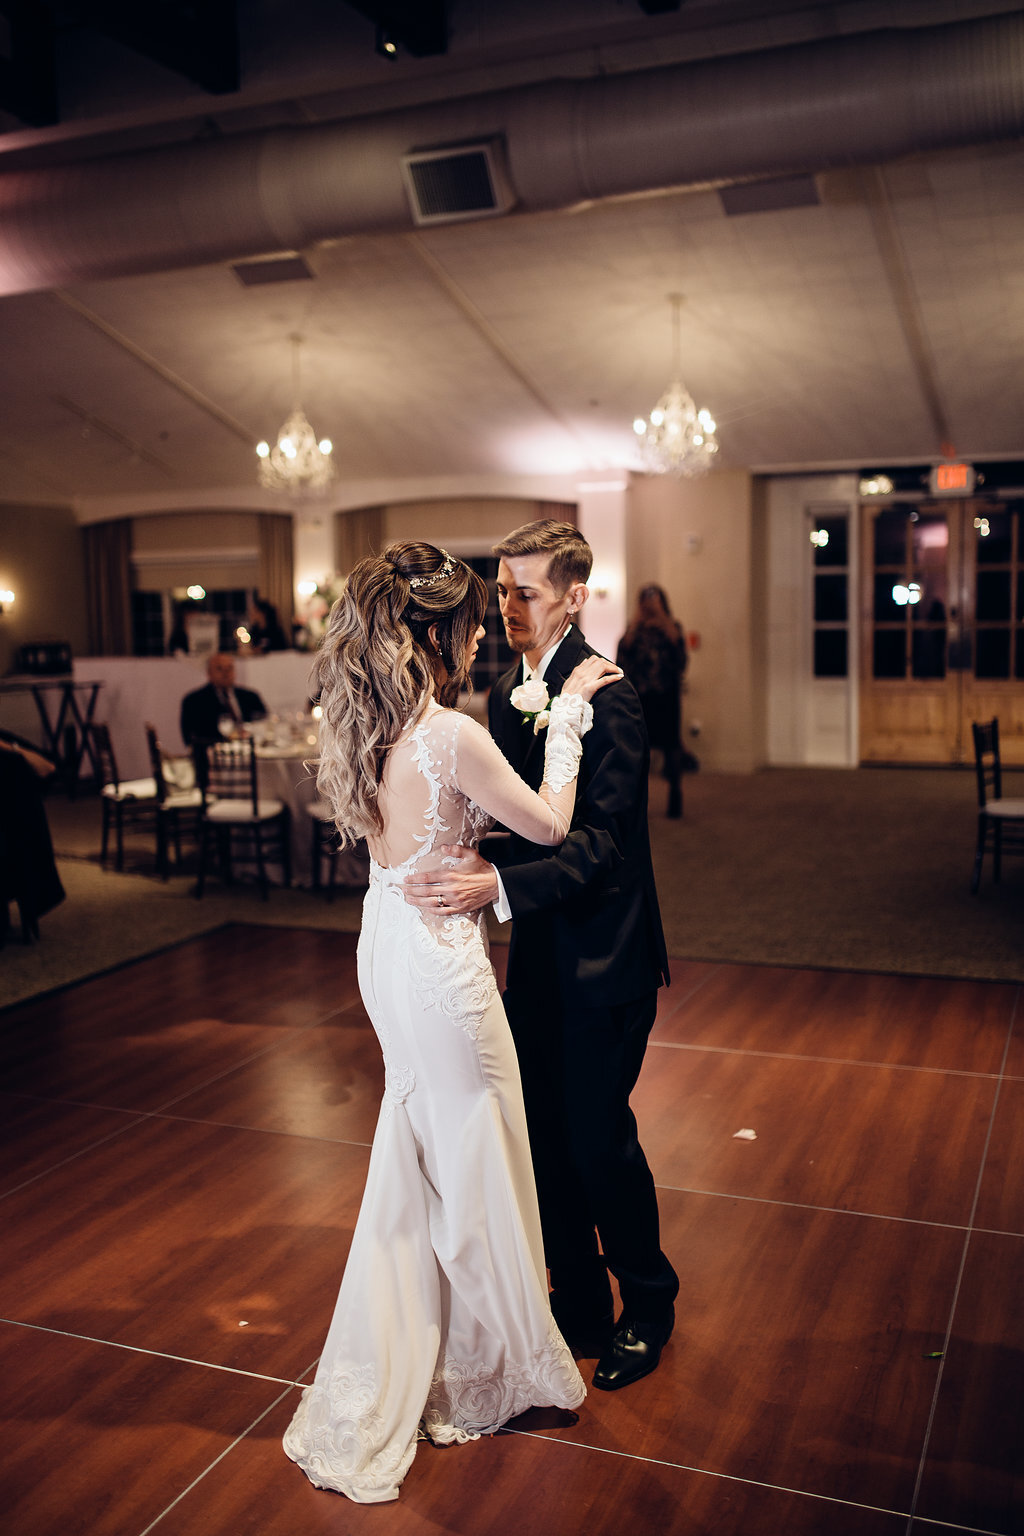 Wedding Photograph Of Bride And Groom Doing Their First Dance Los Angeles